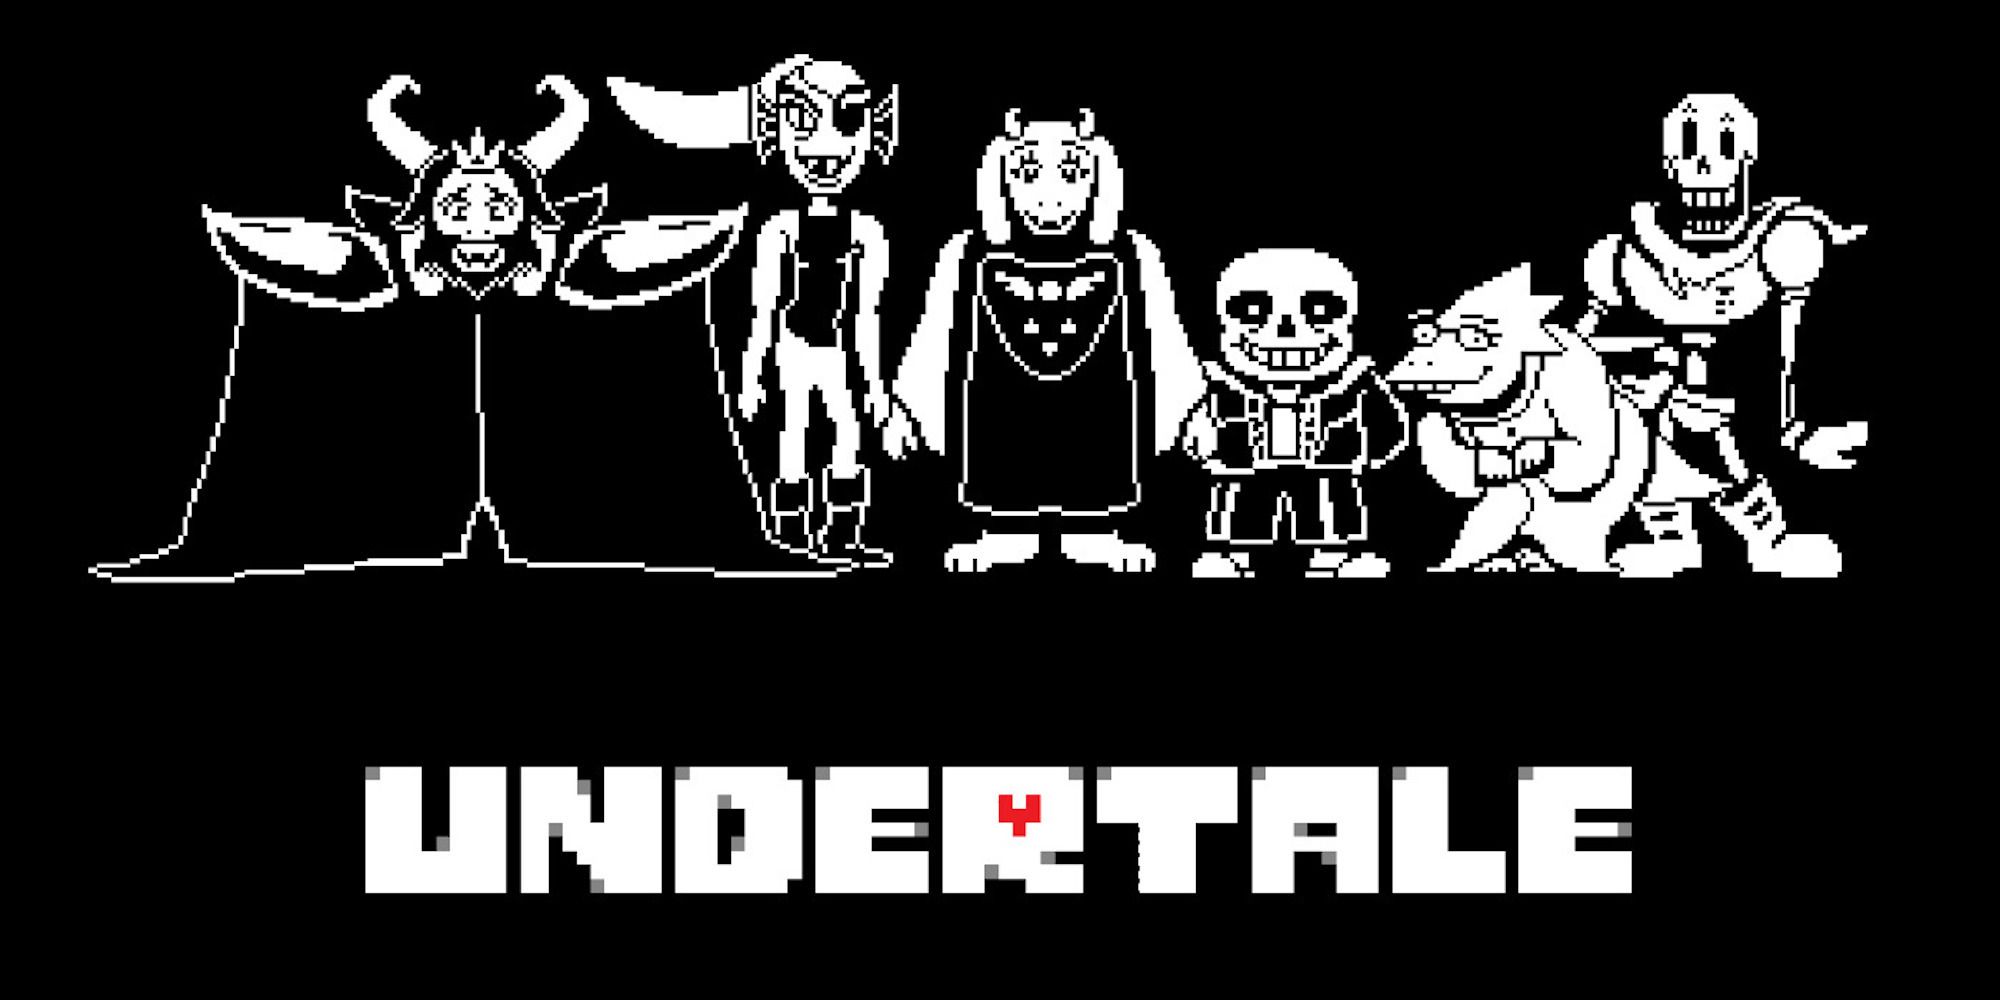 Promo art featuring characters from Undertale